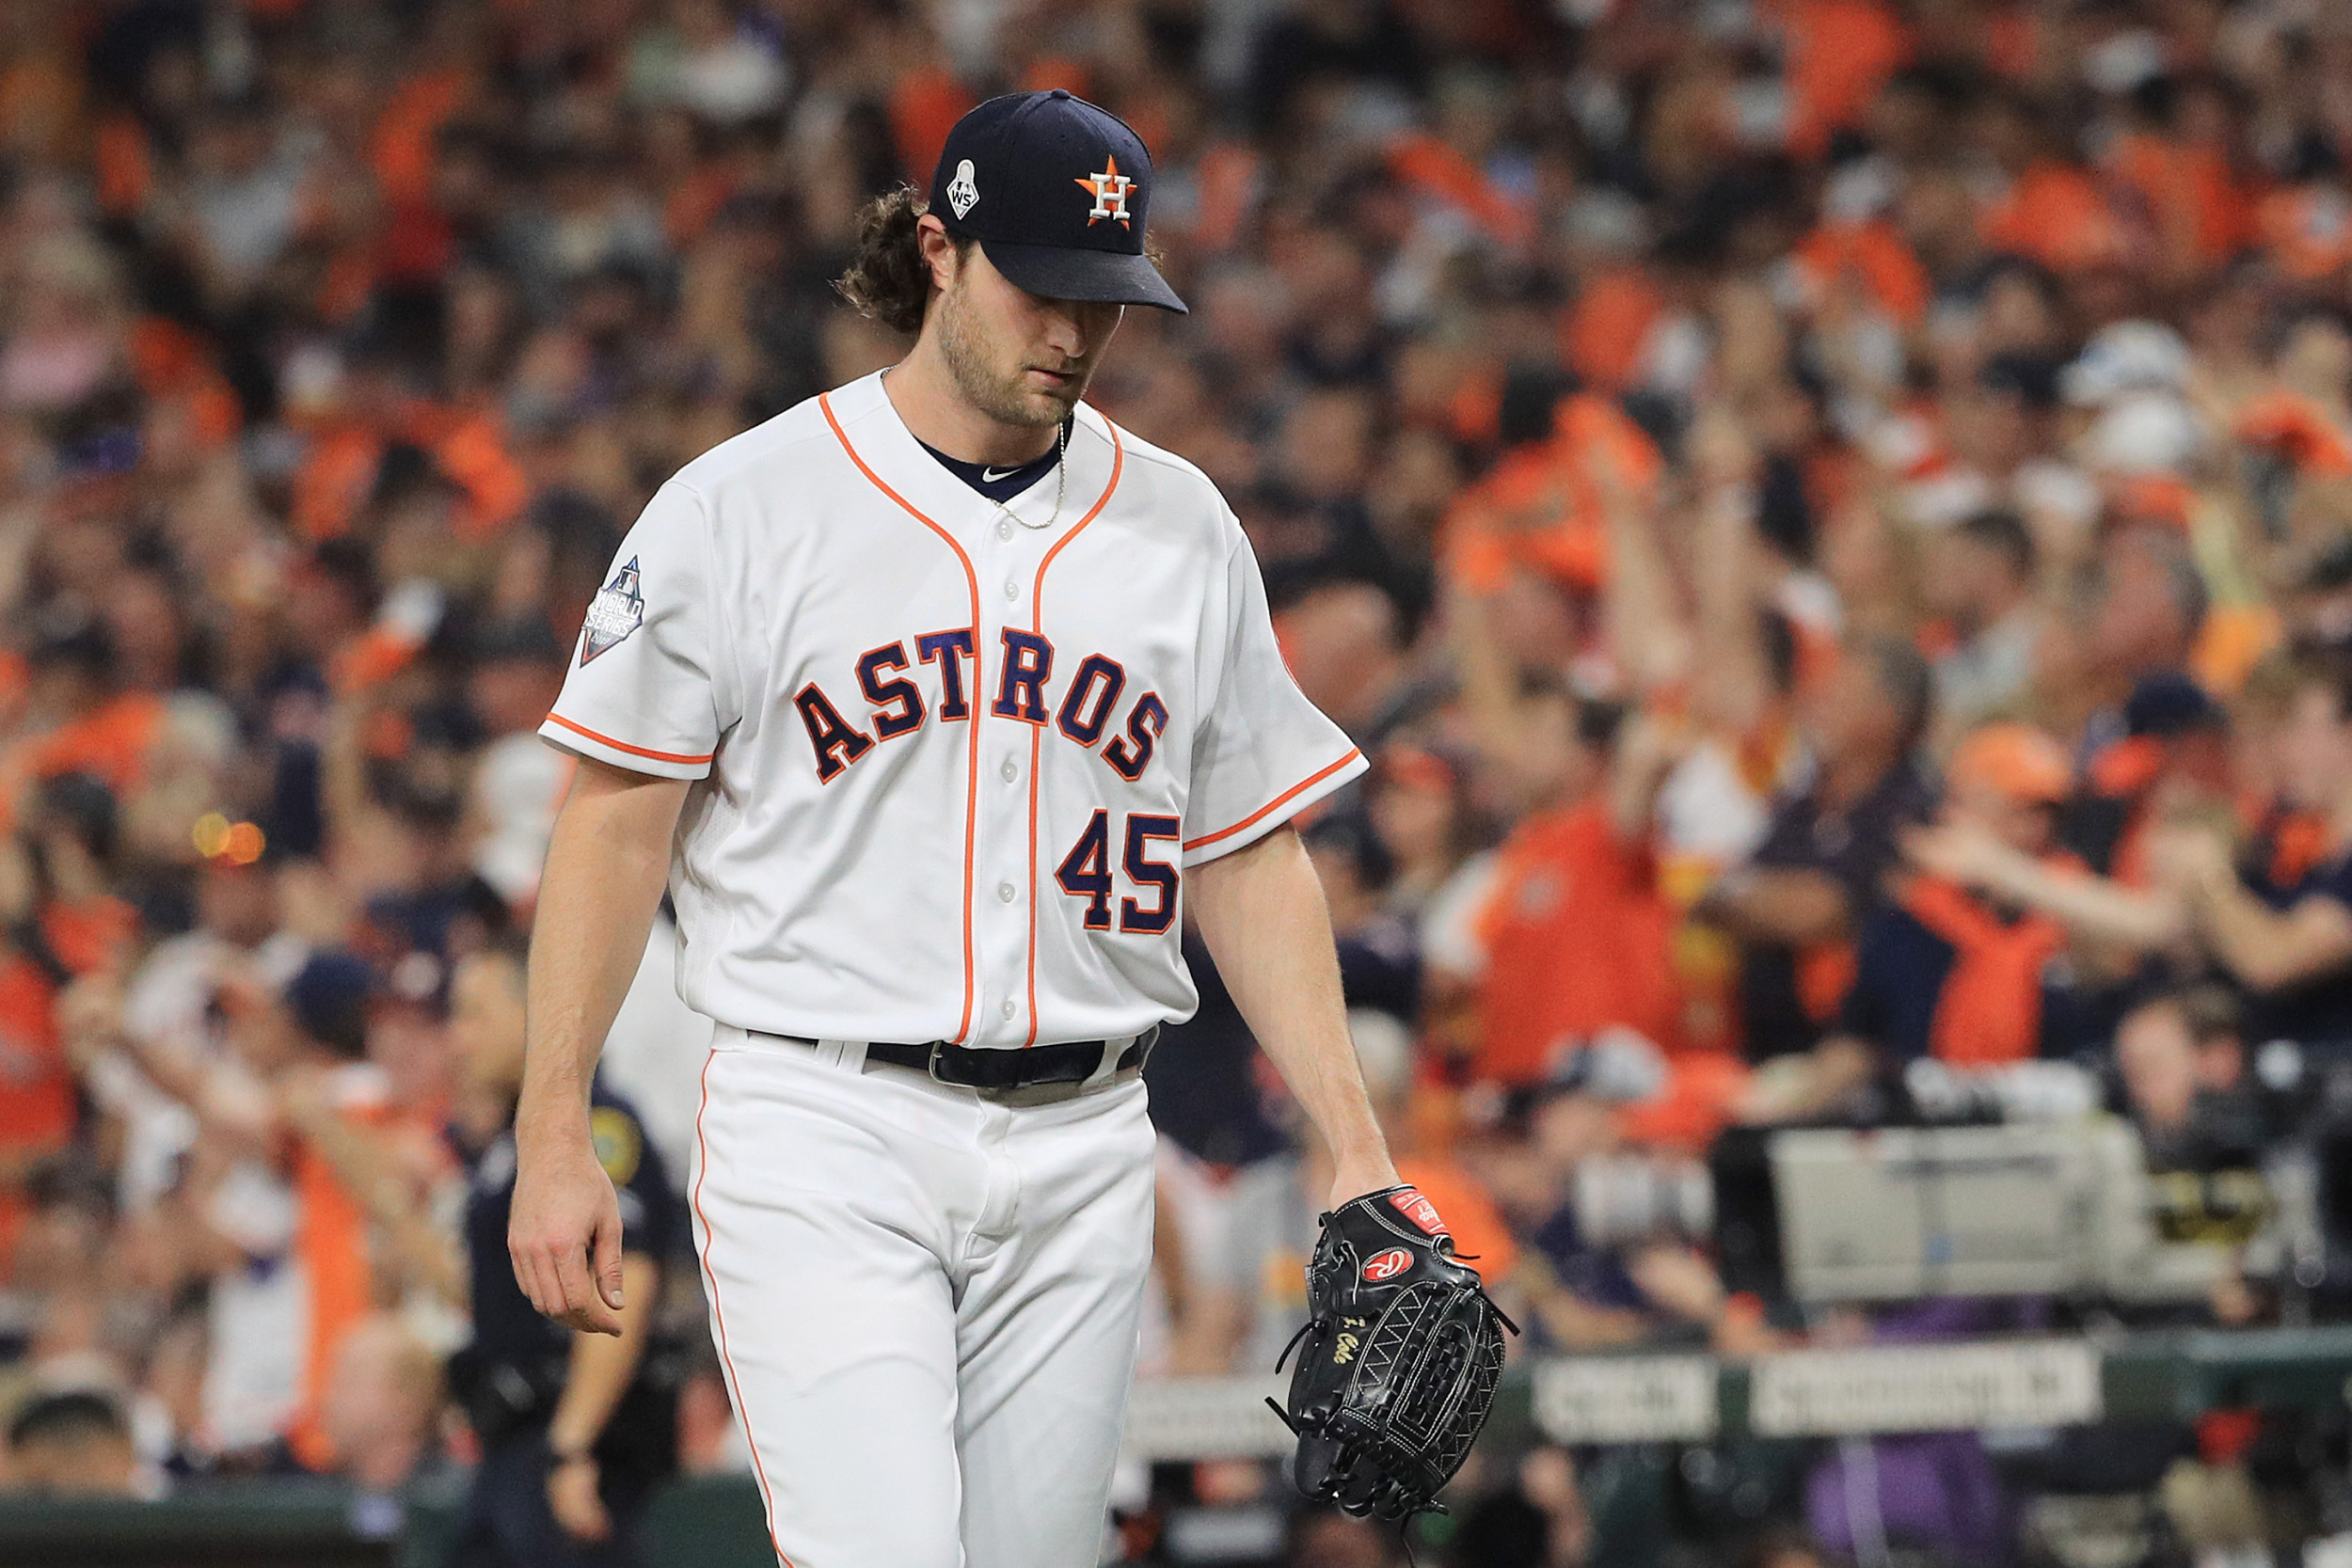 Astros Vs. Nationals: Five Things We Learned From World Series Game 1